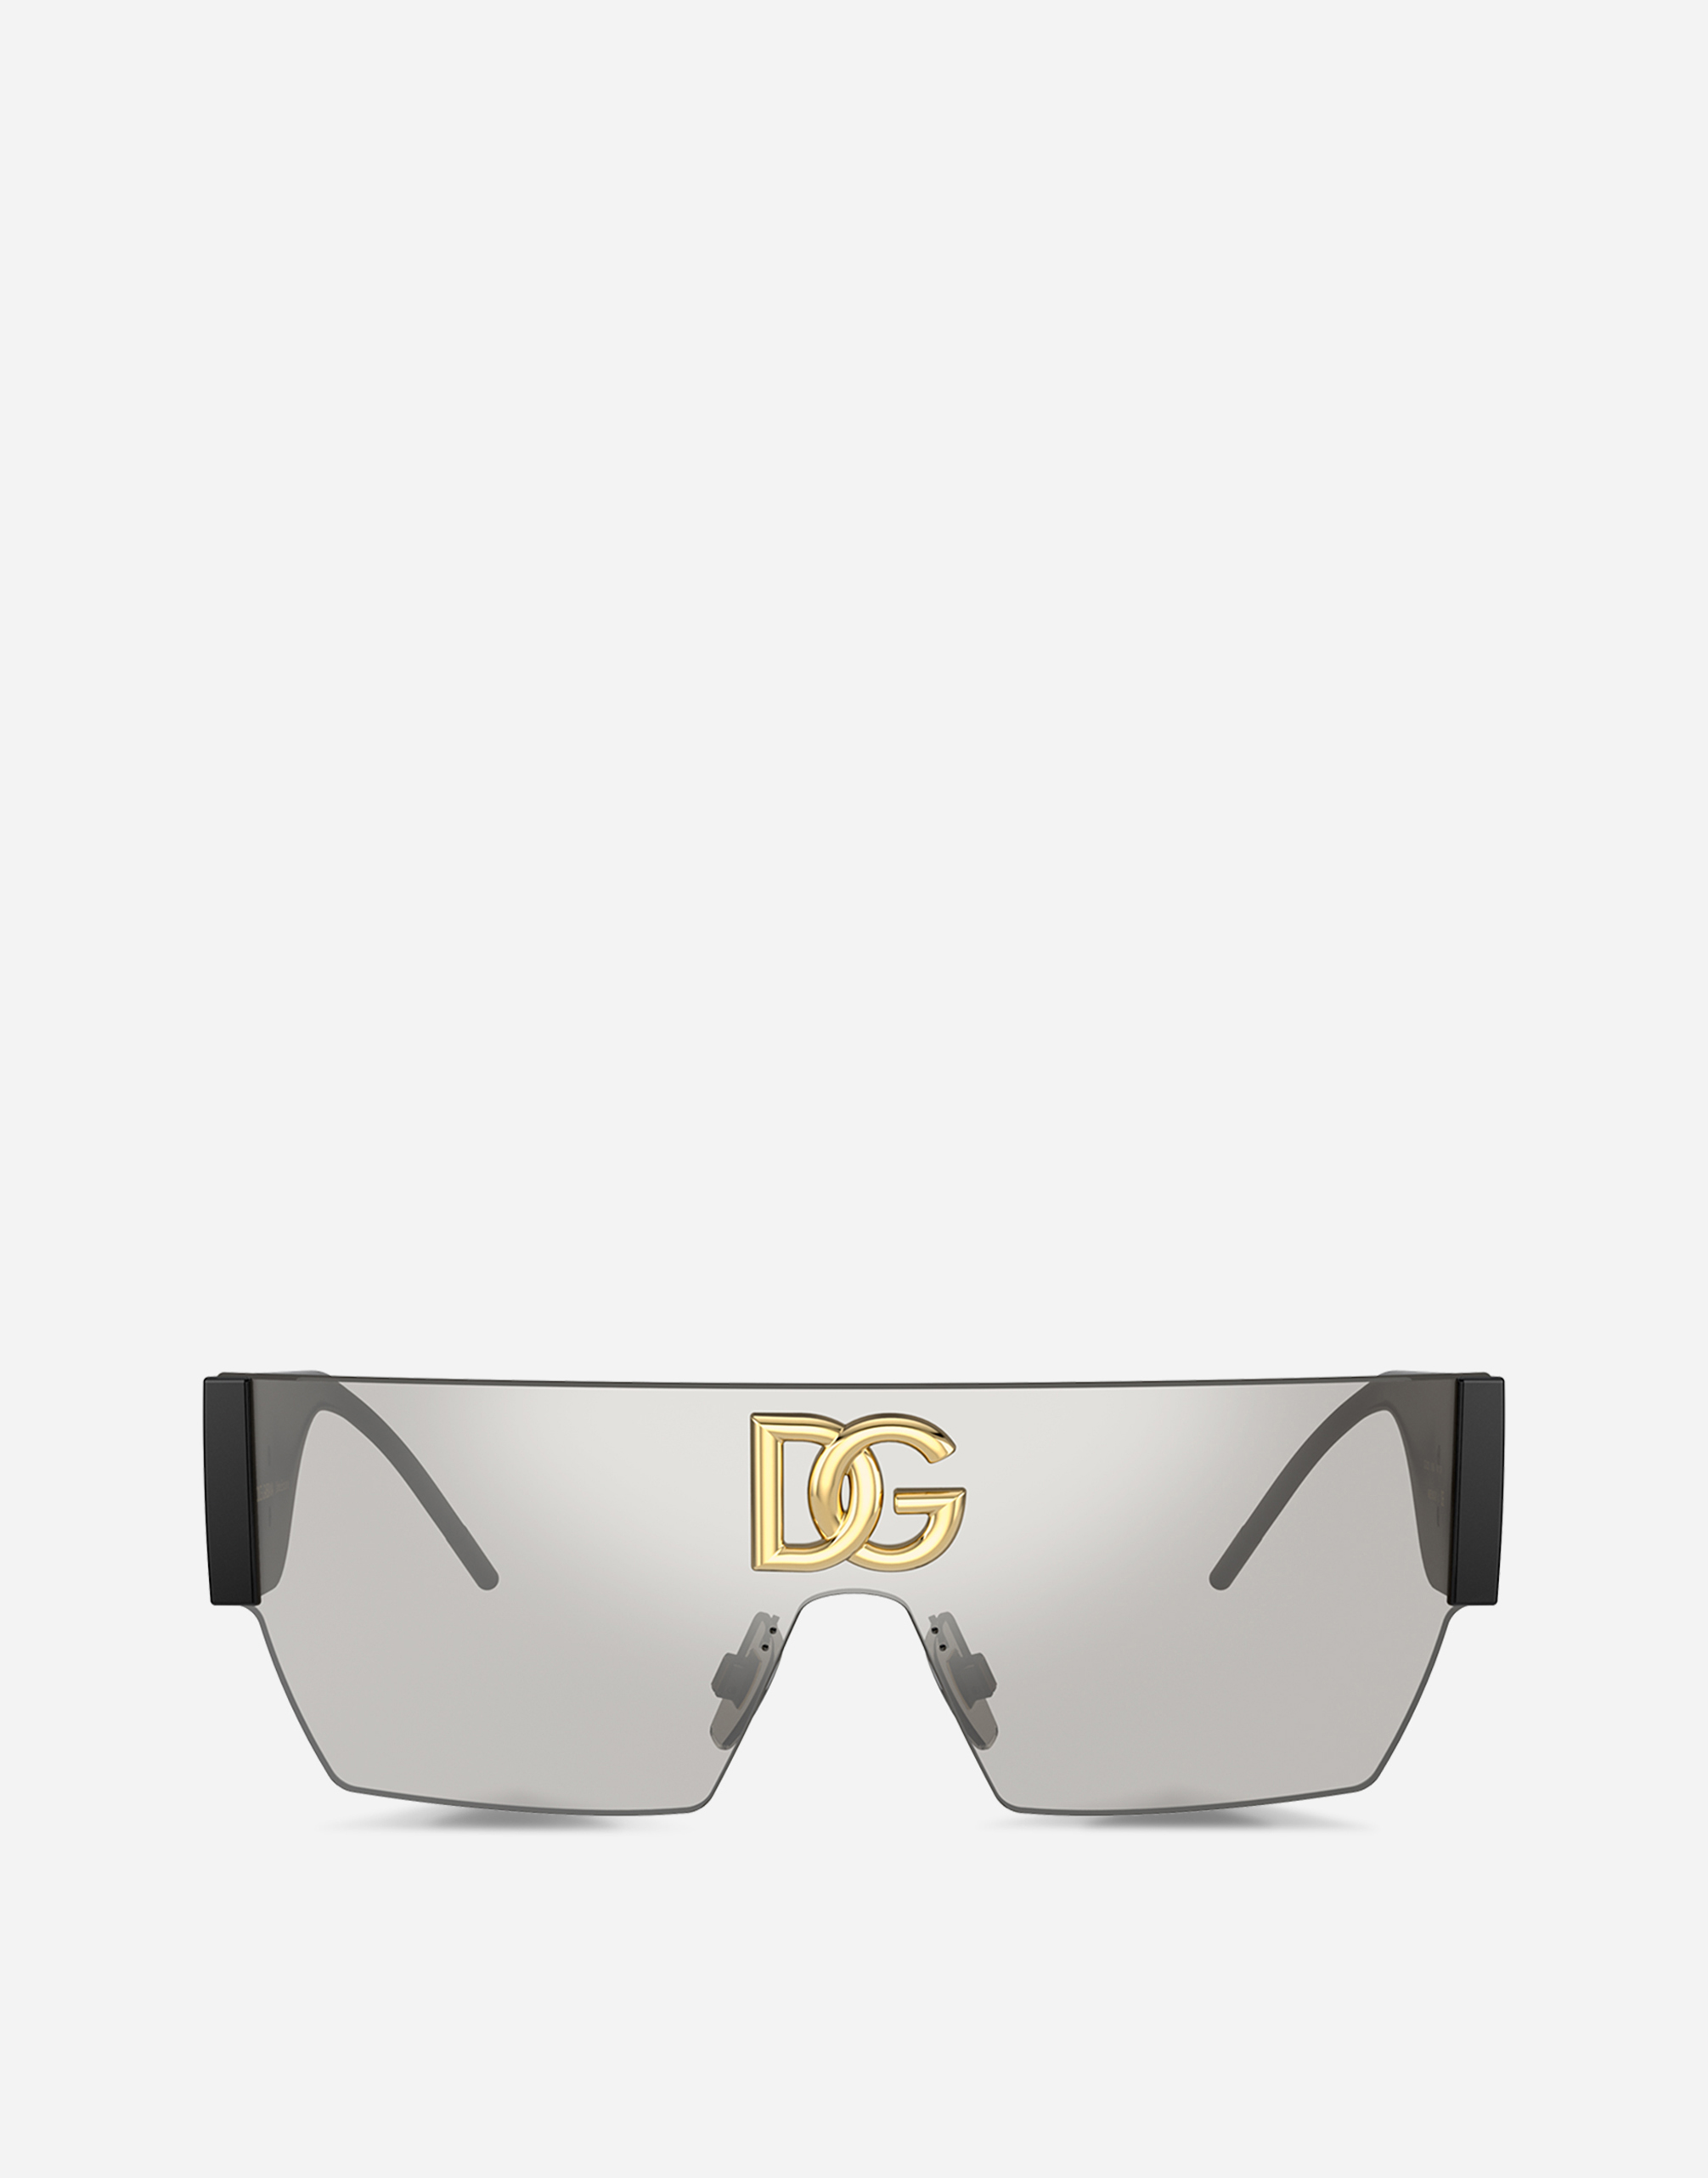 Geometric transparency sunglasses in Silver